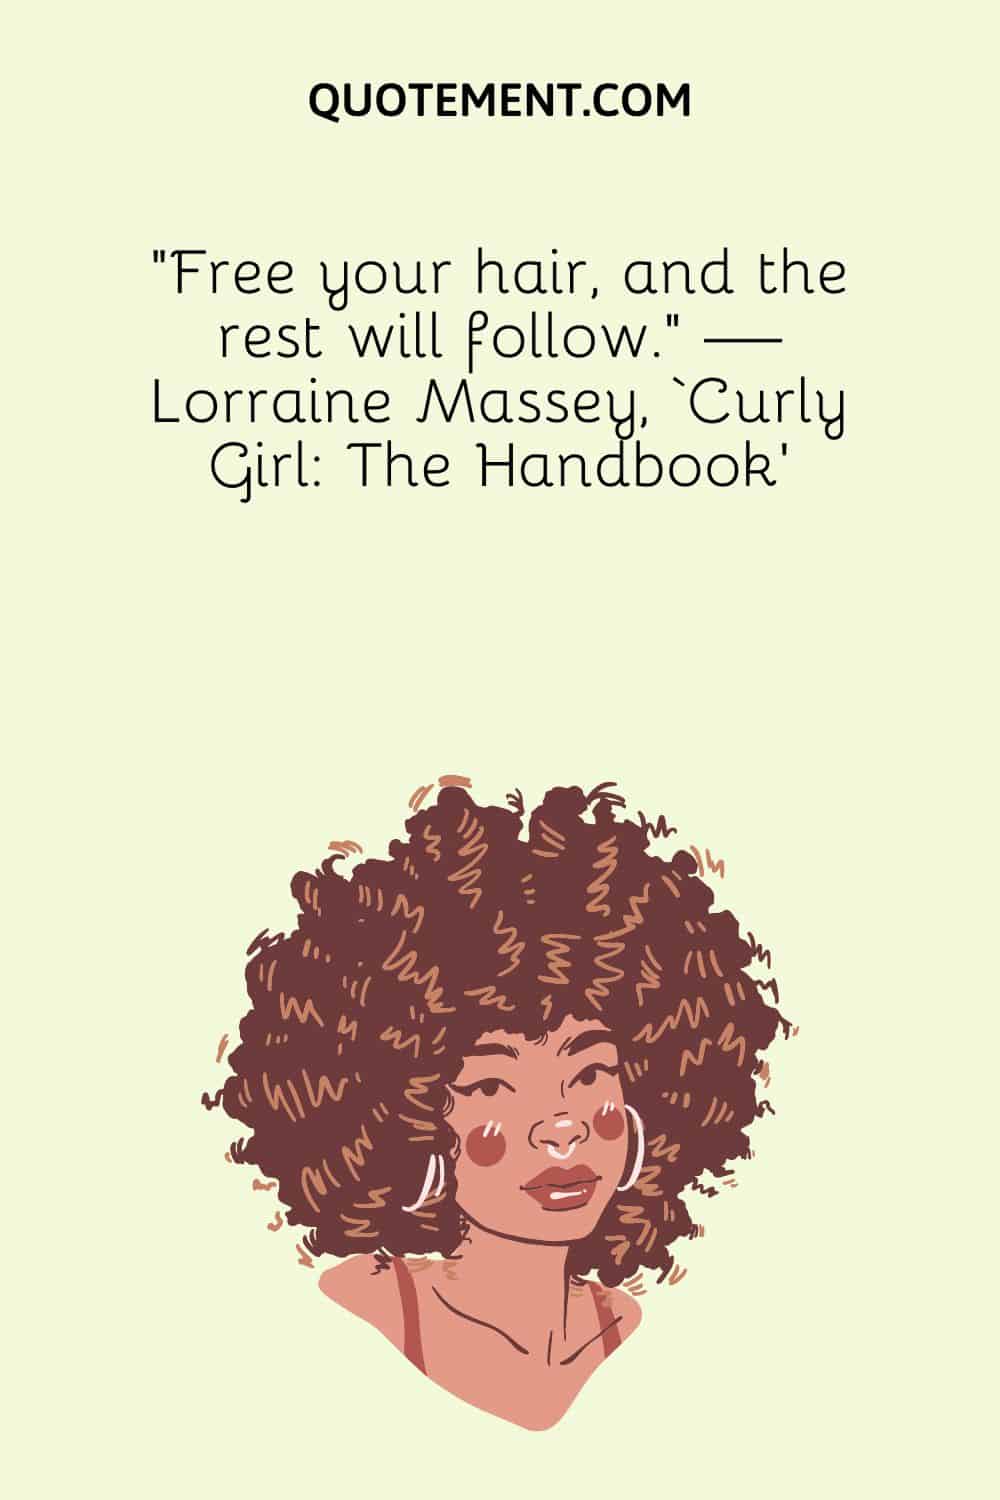 Free your hair, and the rest will follow